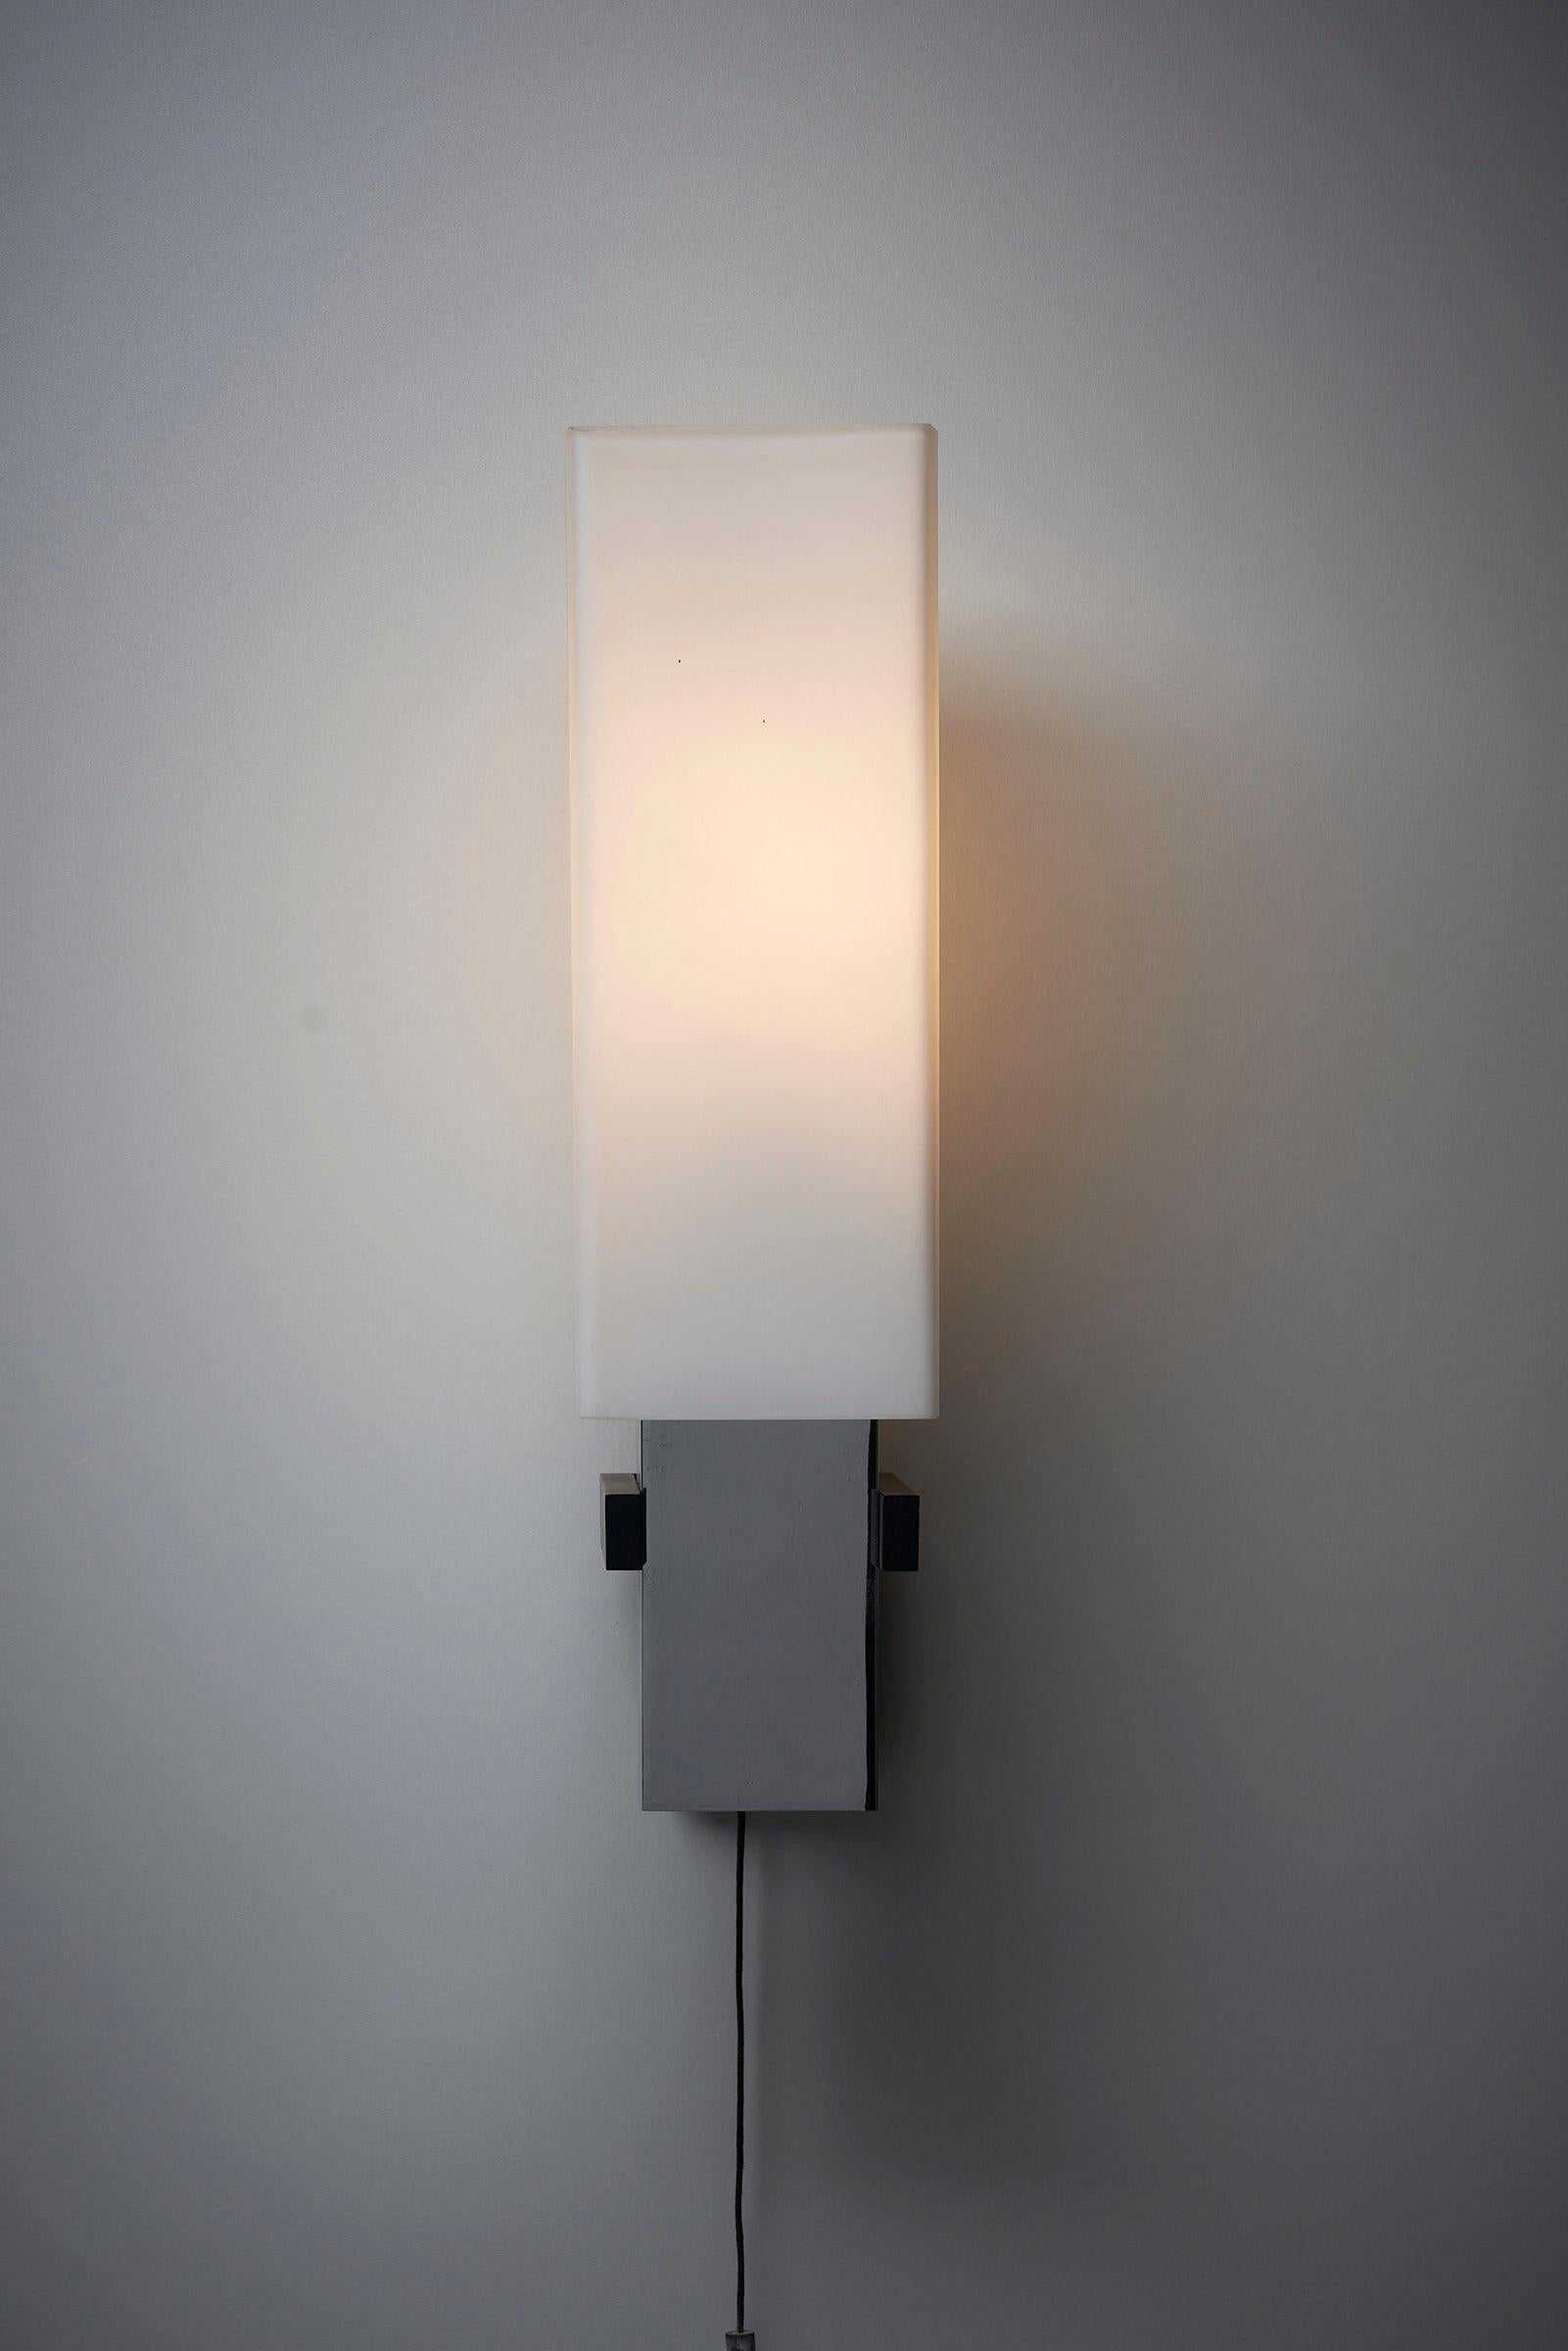 Space Age Futuristic Wall Lamps By Cosack, Germany For Sale